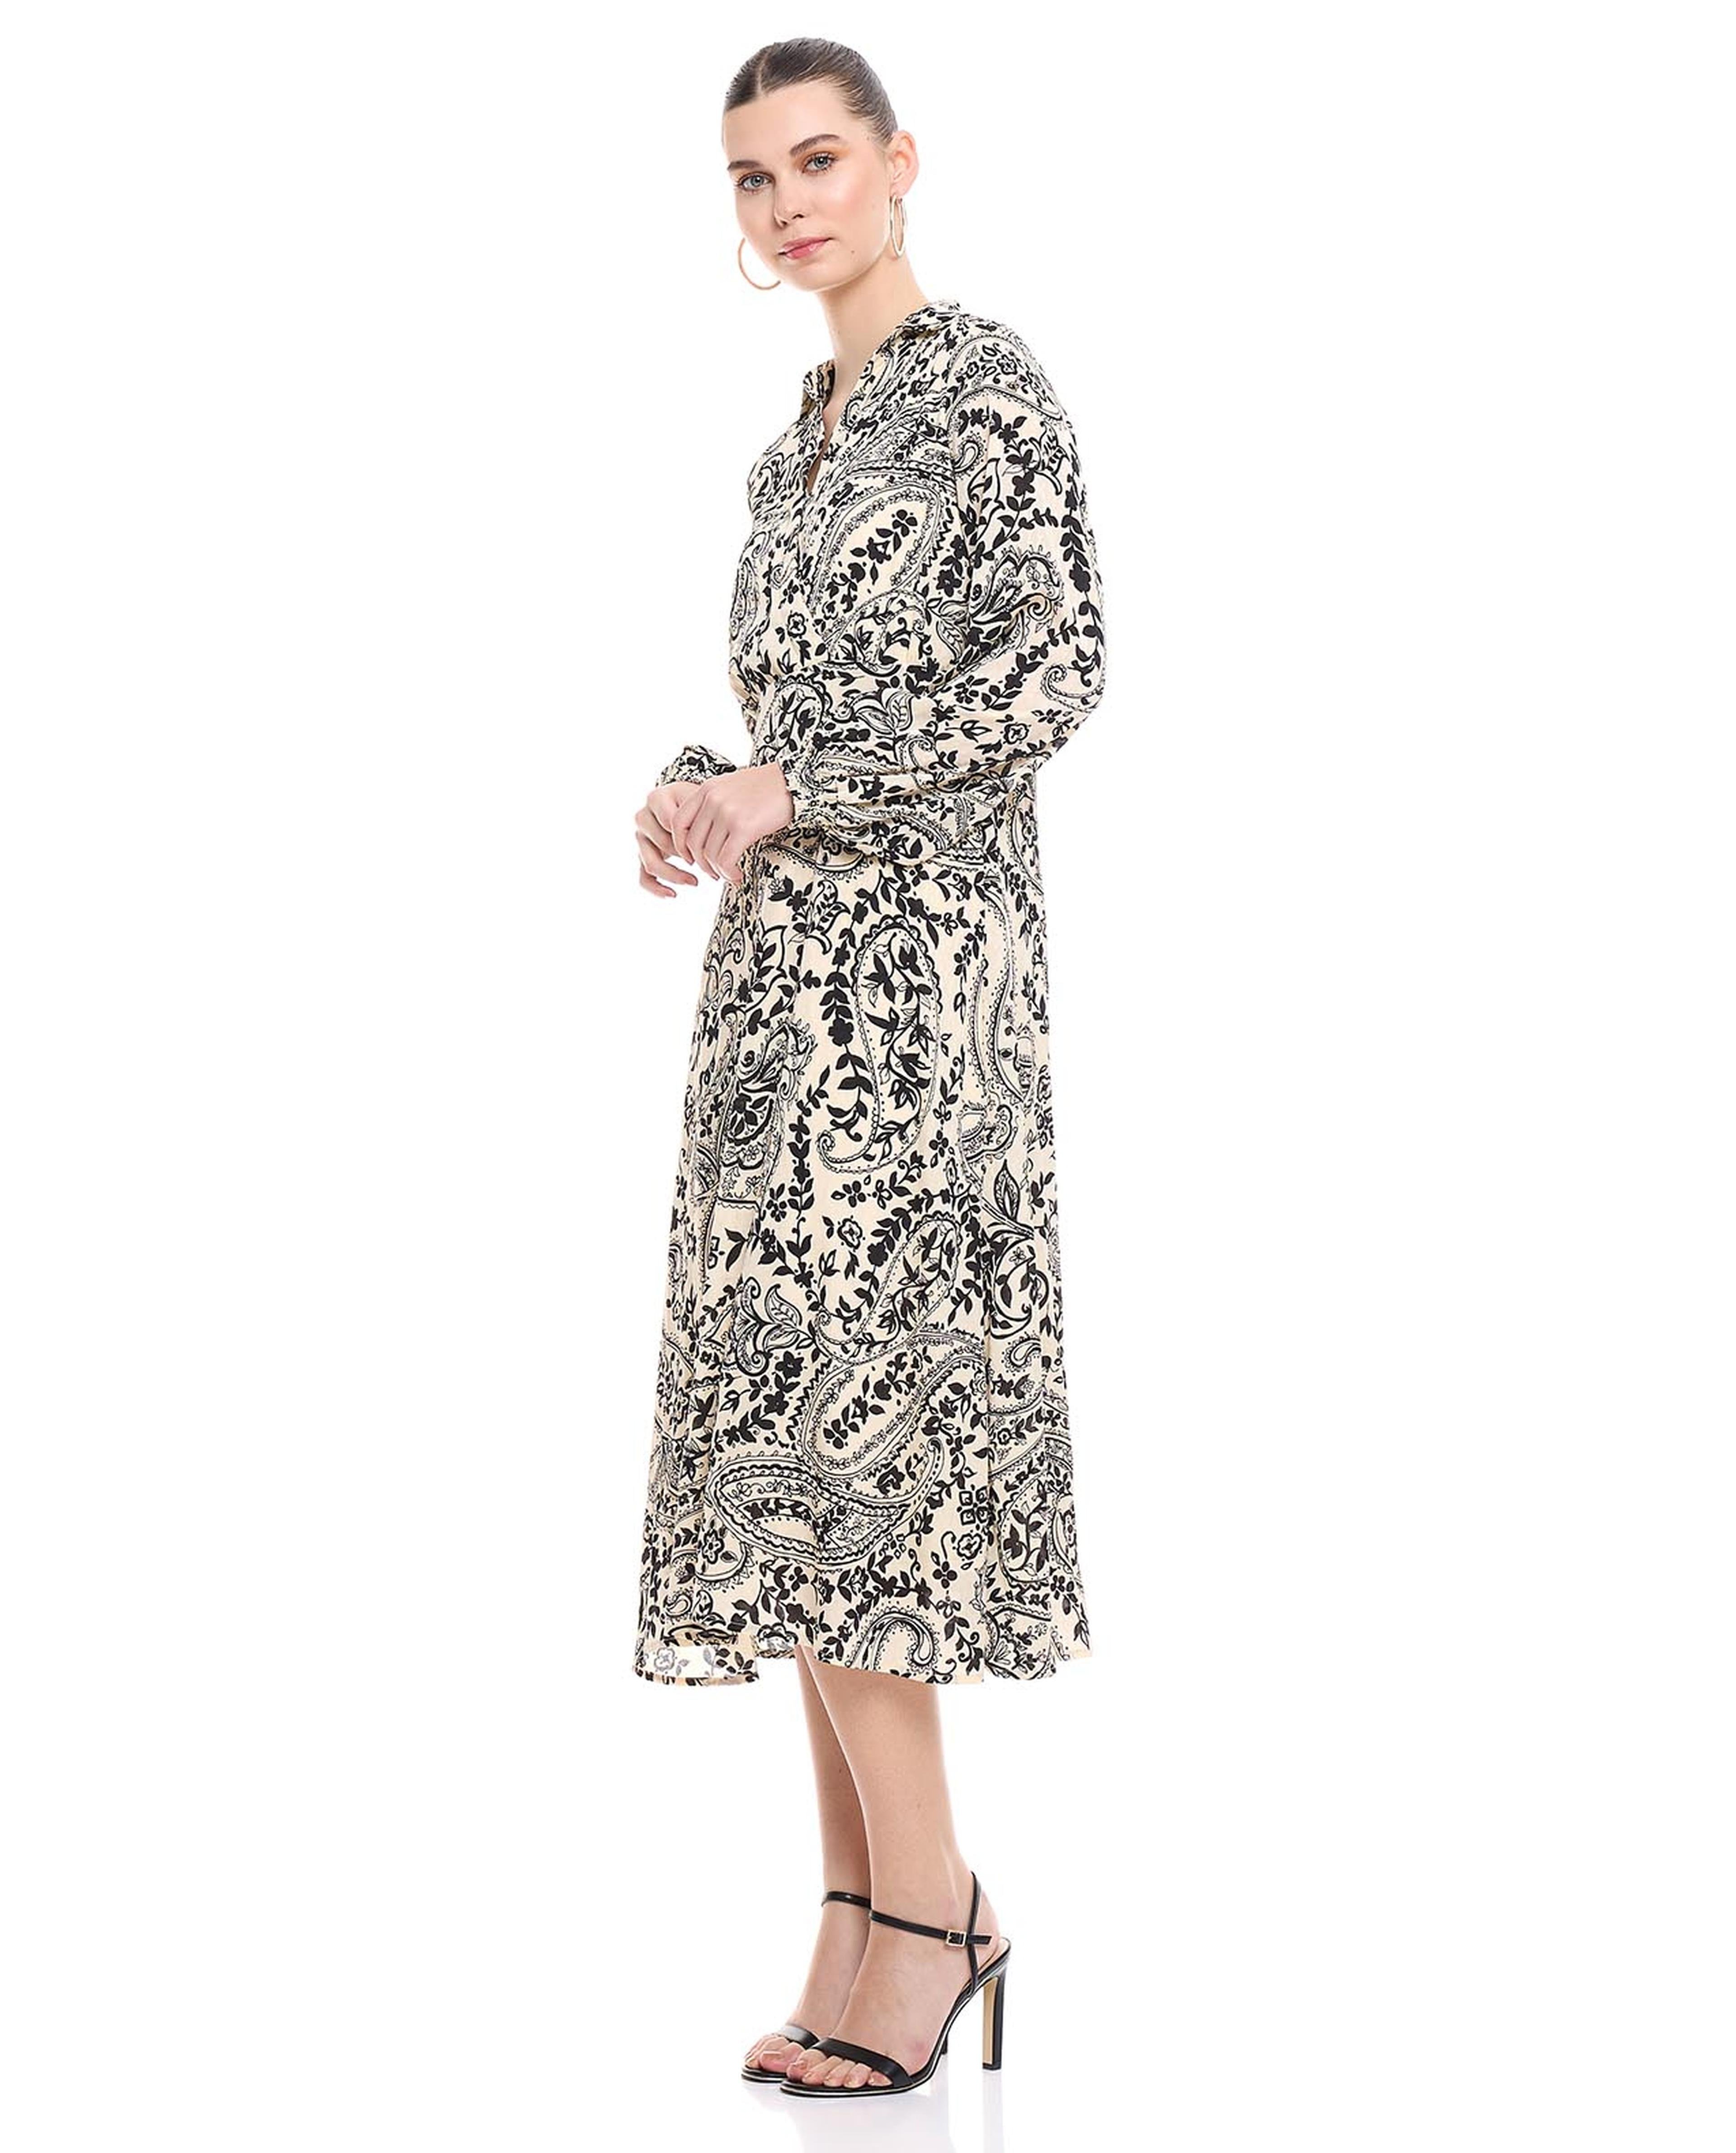 Paisley Print A-Line Dress with V-Neck and Bishop Sleeves